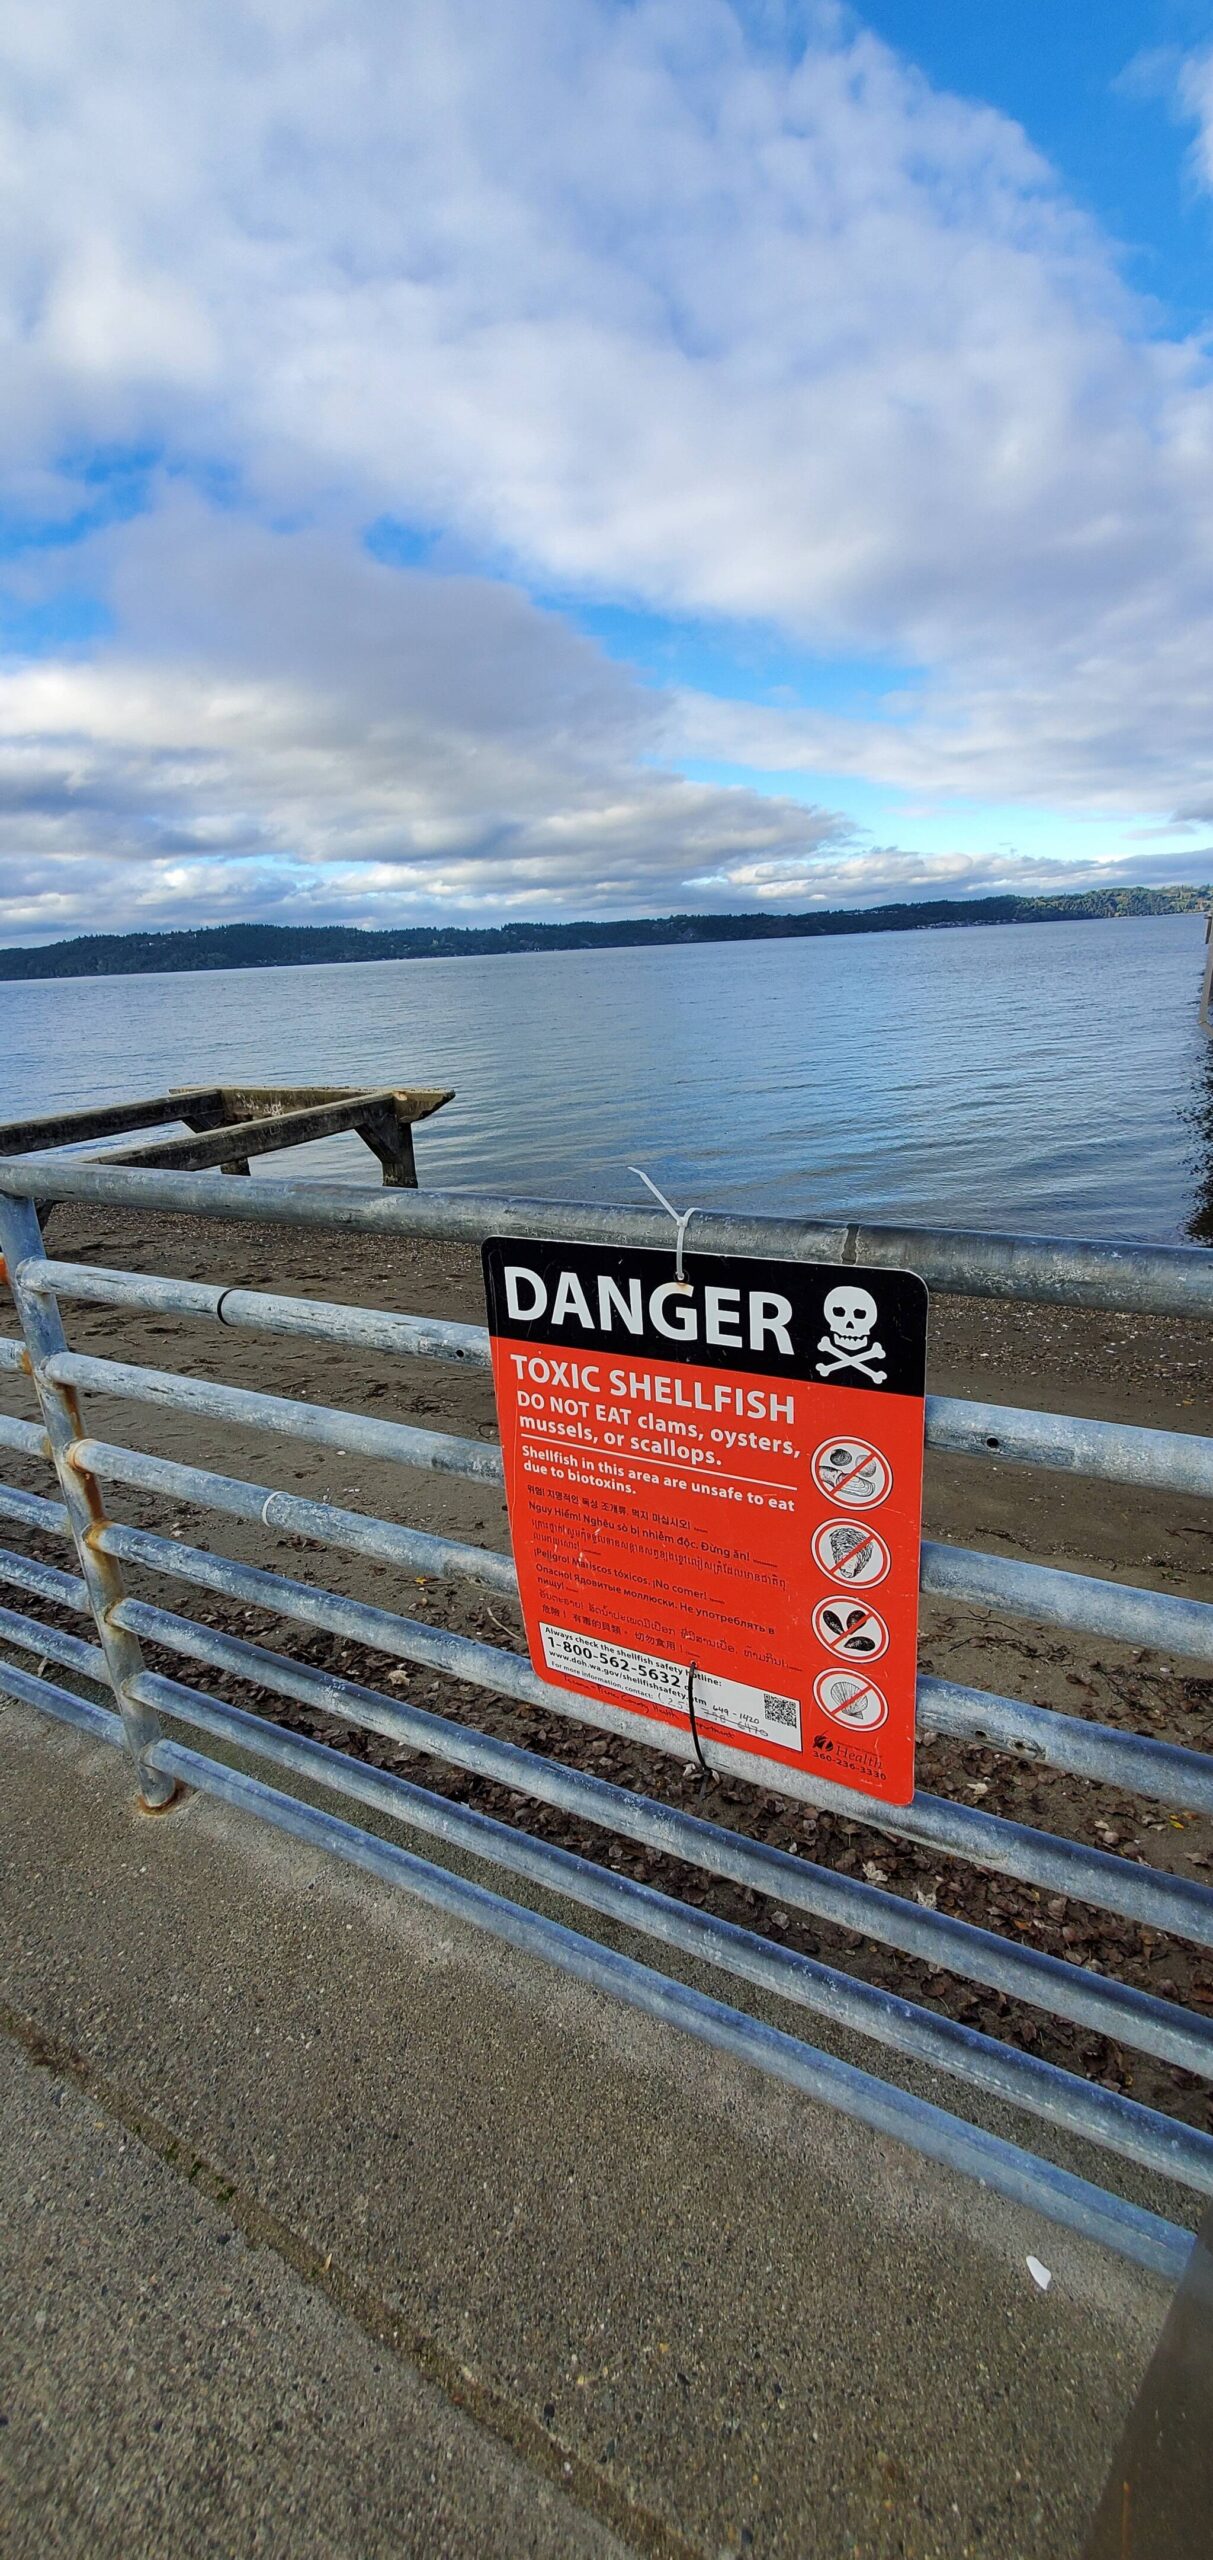 Photo by Keelin Everly-Lang / The Mirror: A warning sign at a beach in Federal Way notifying beachgoers that they should not consume any shellfish at that location.